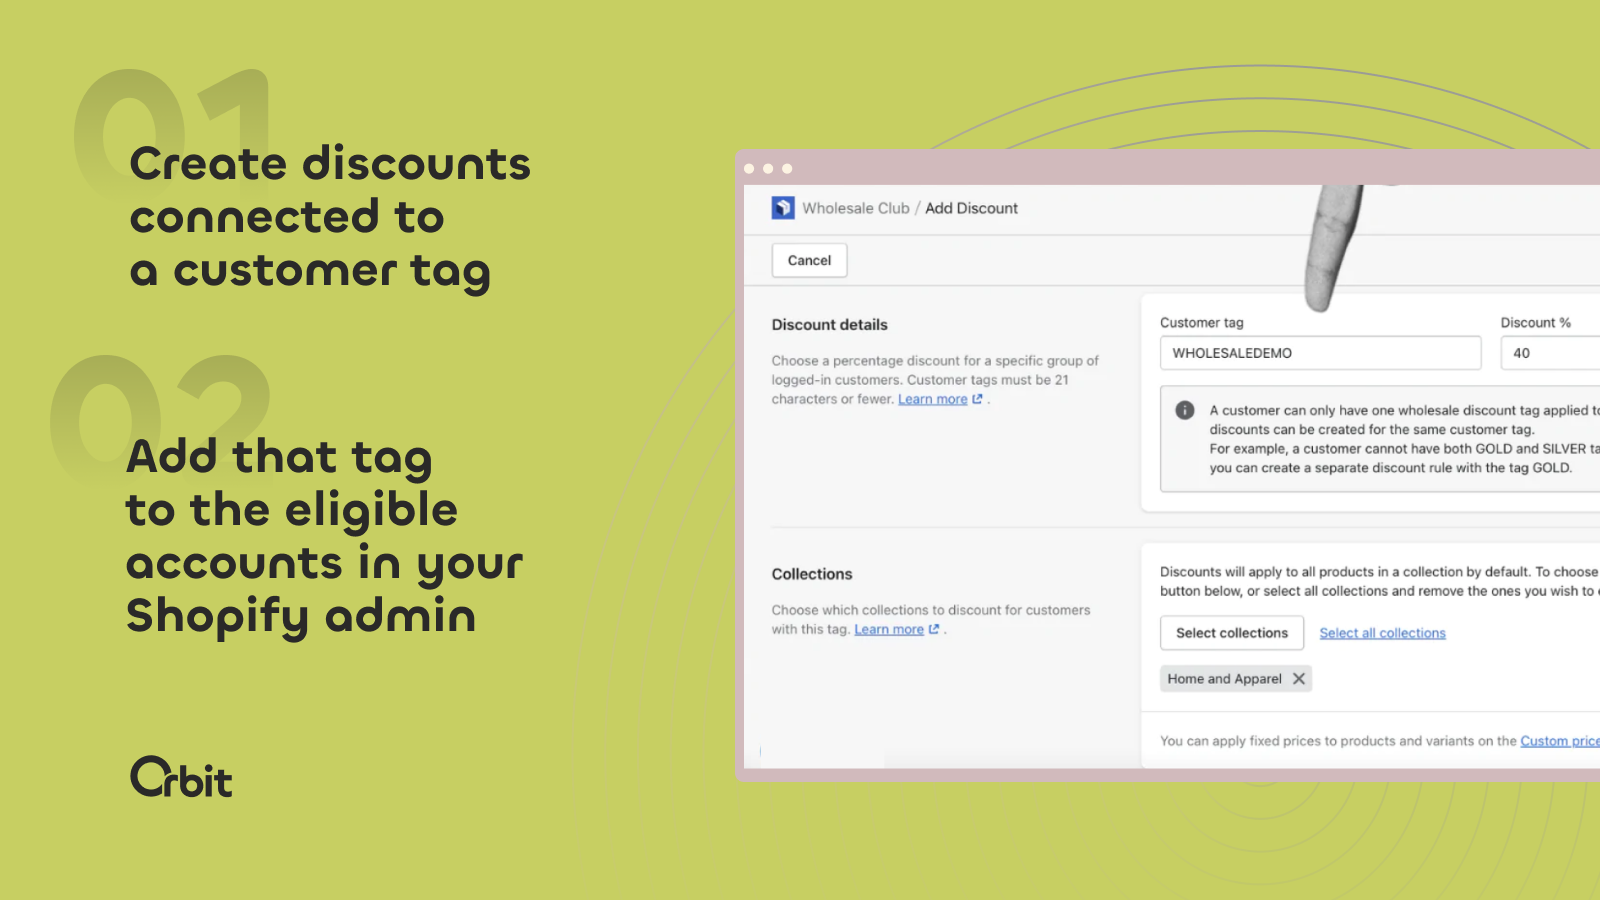 Create discounts connected to a customer tag.